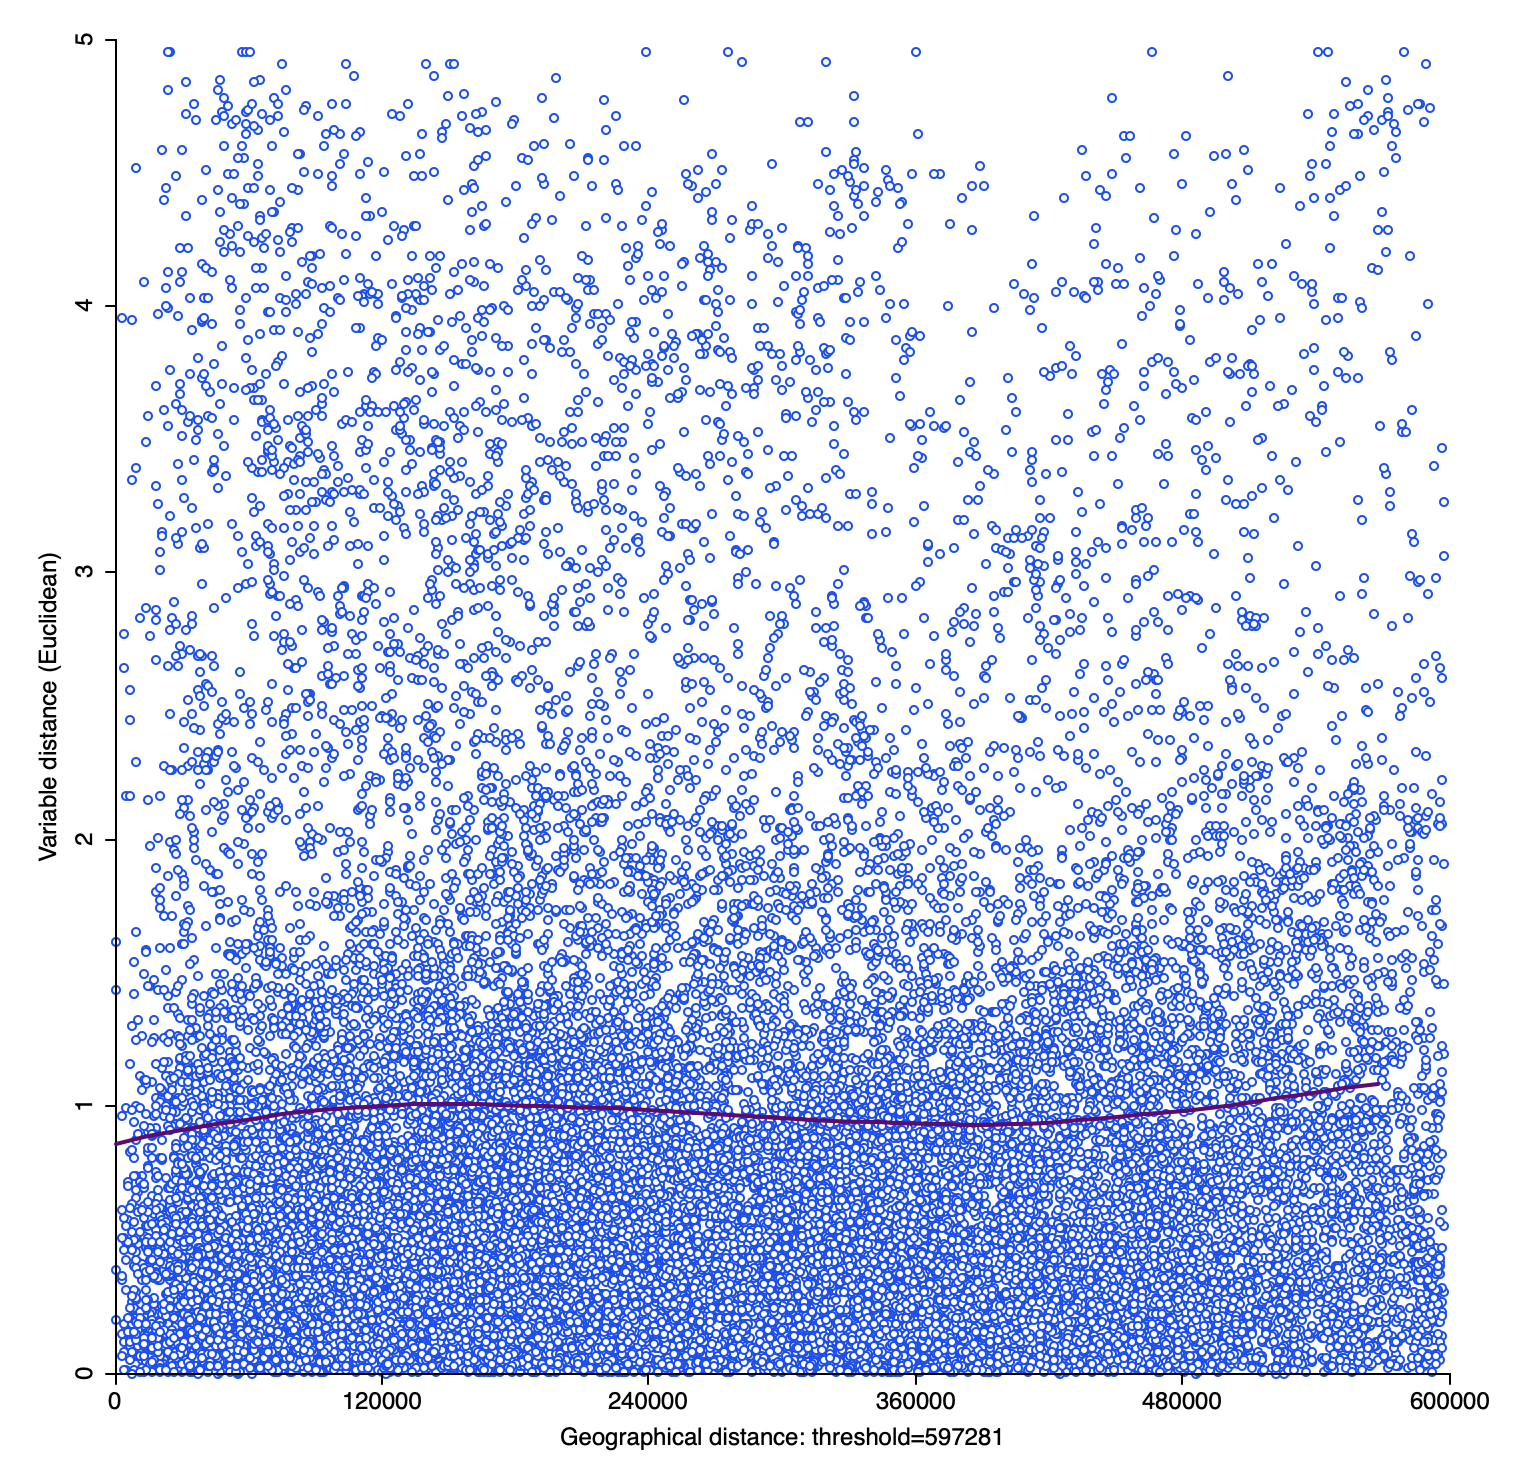 Smoothed distance scatter plot